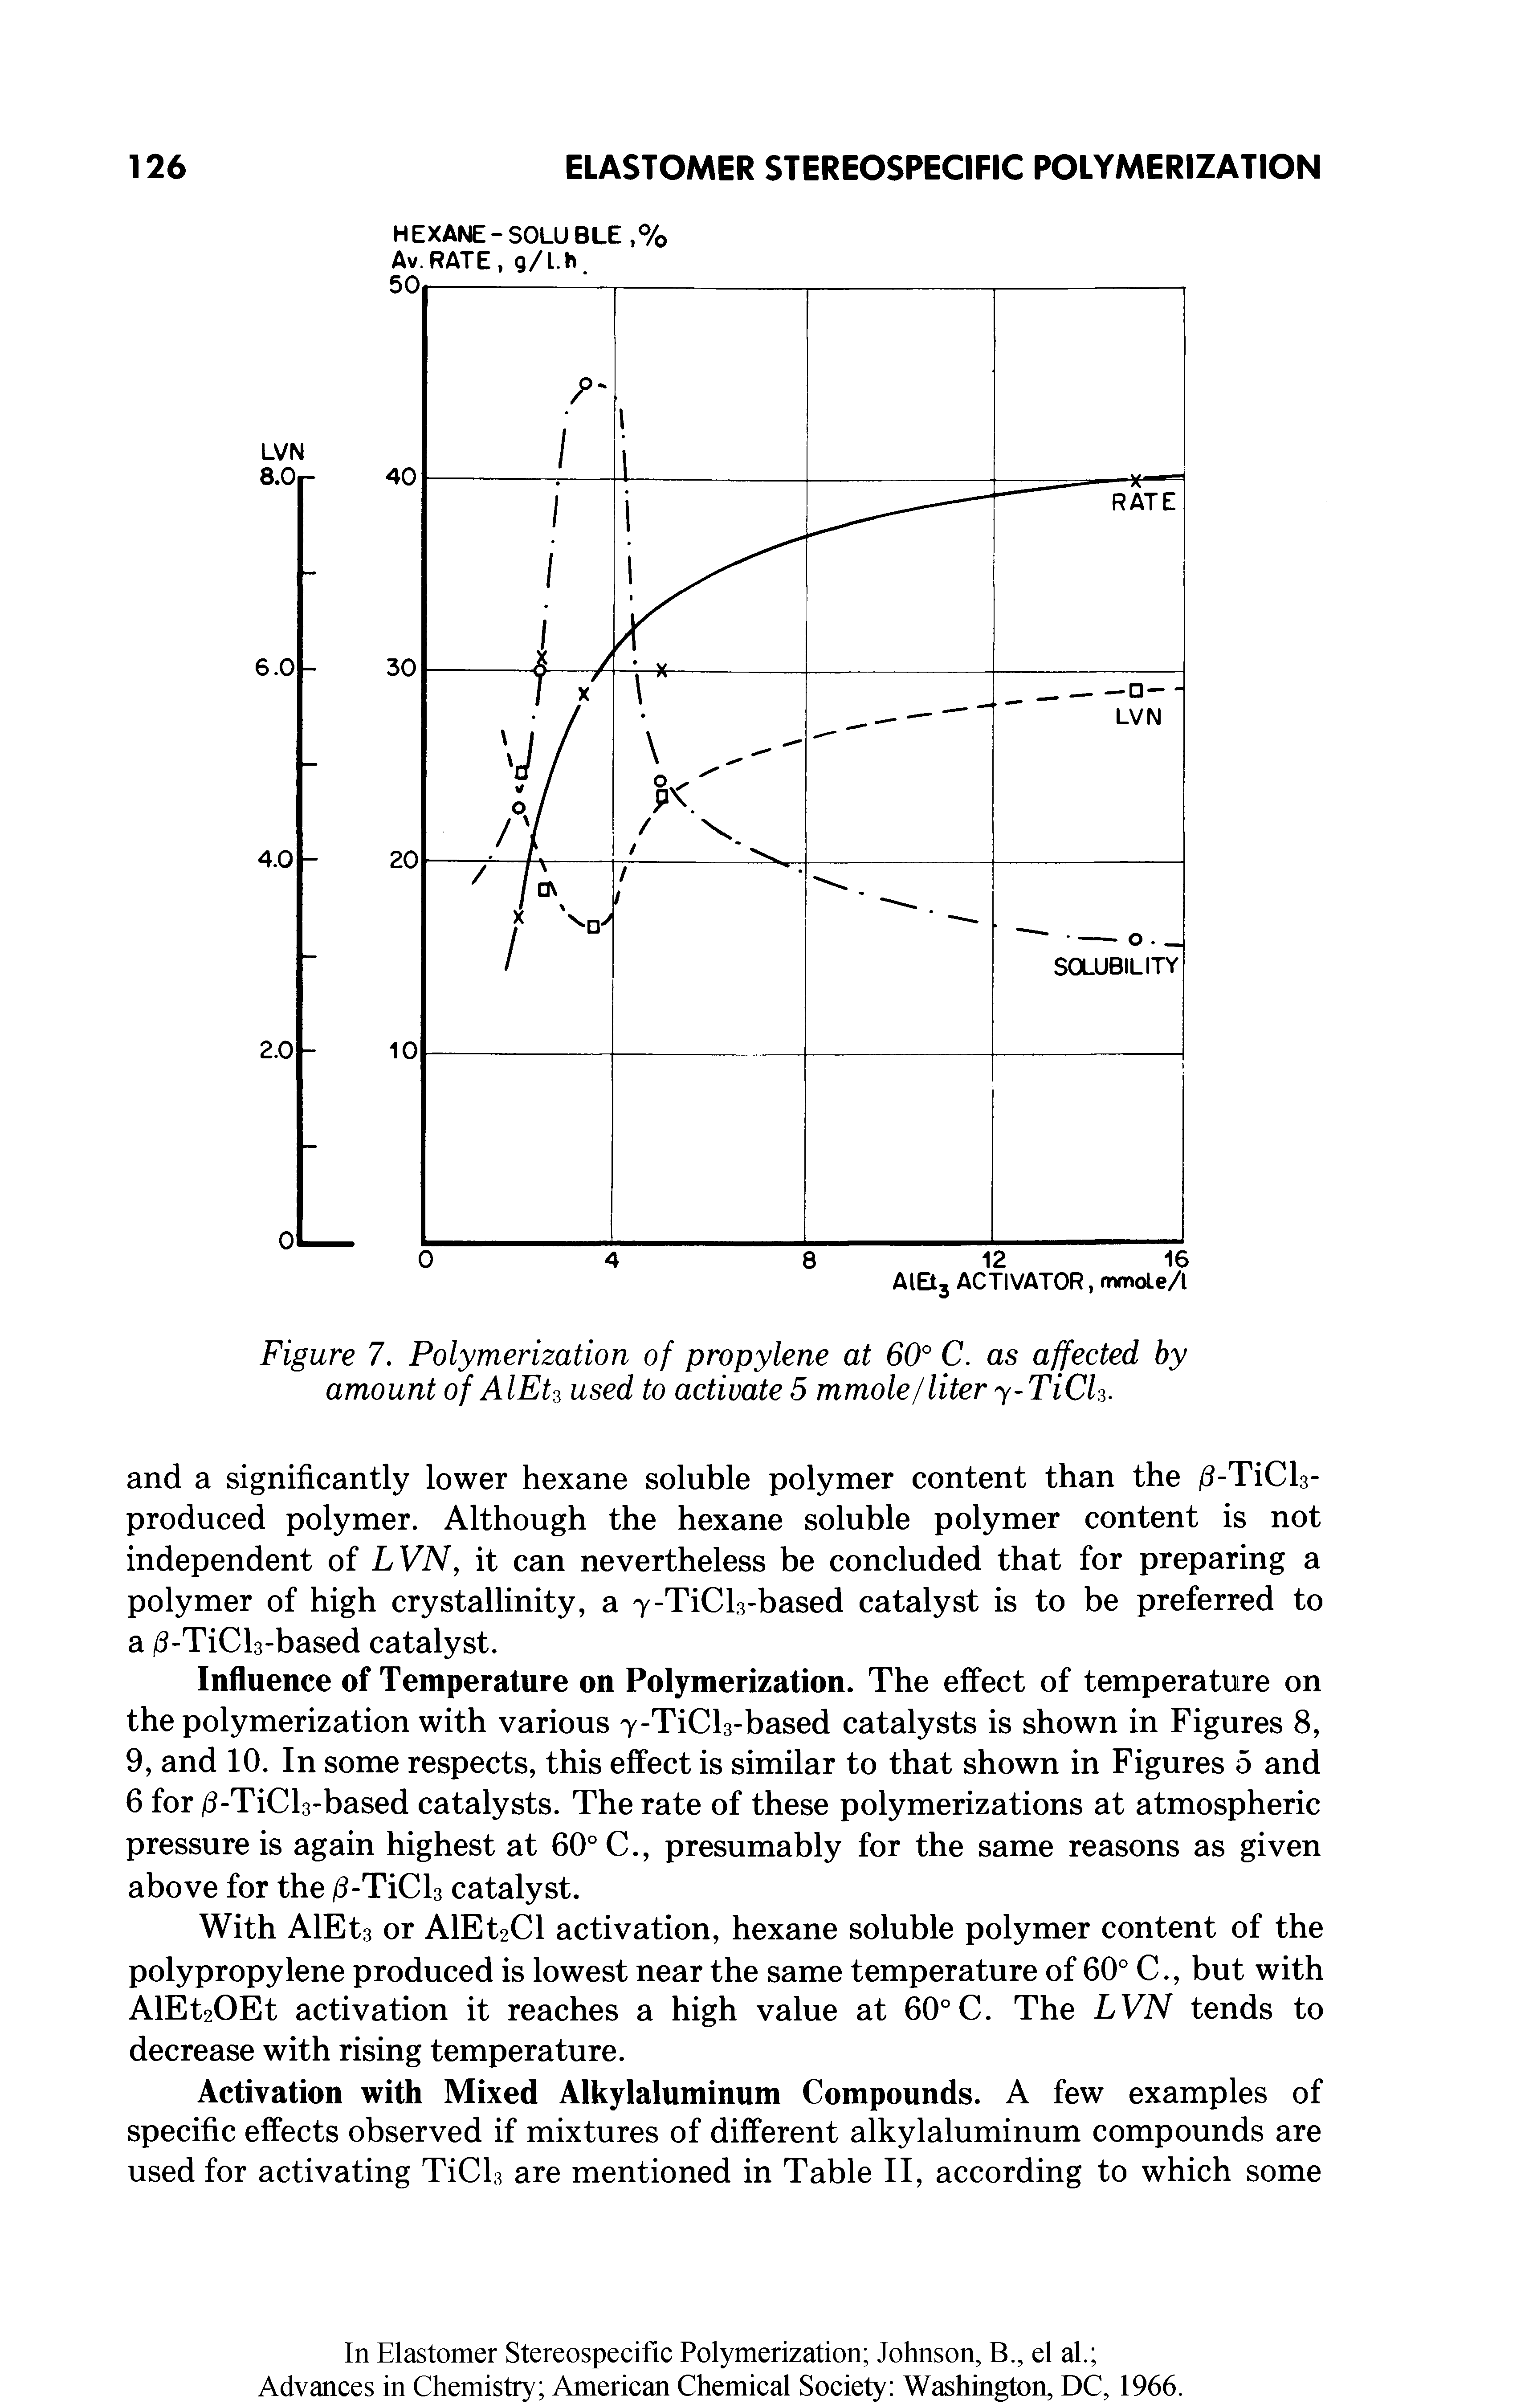 Figure 7. Polymerization of propylene at 60° C. as affected by amount of AIEU used to activate 5 mmole / liter y-TiCL.